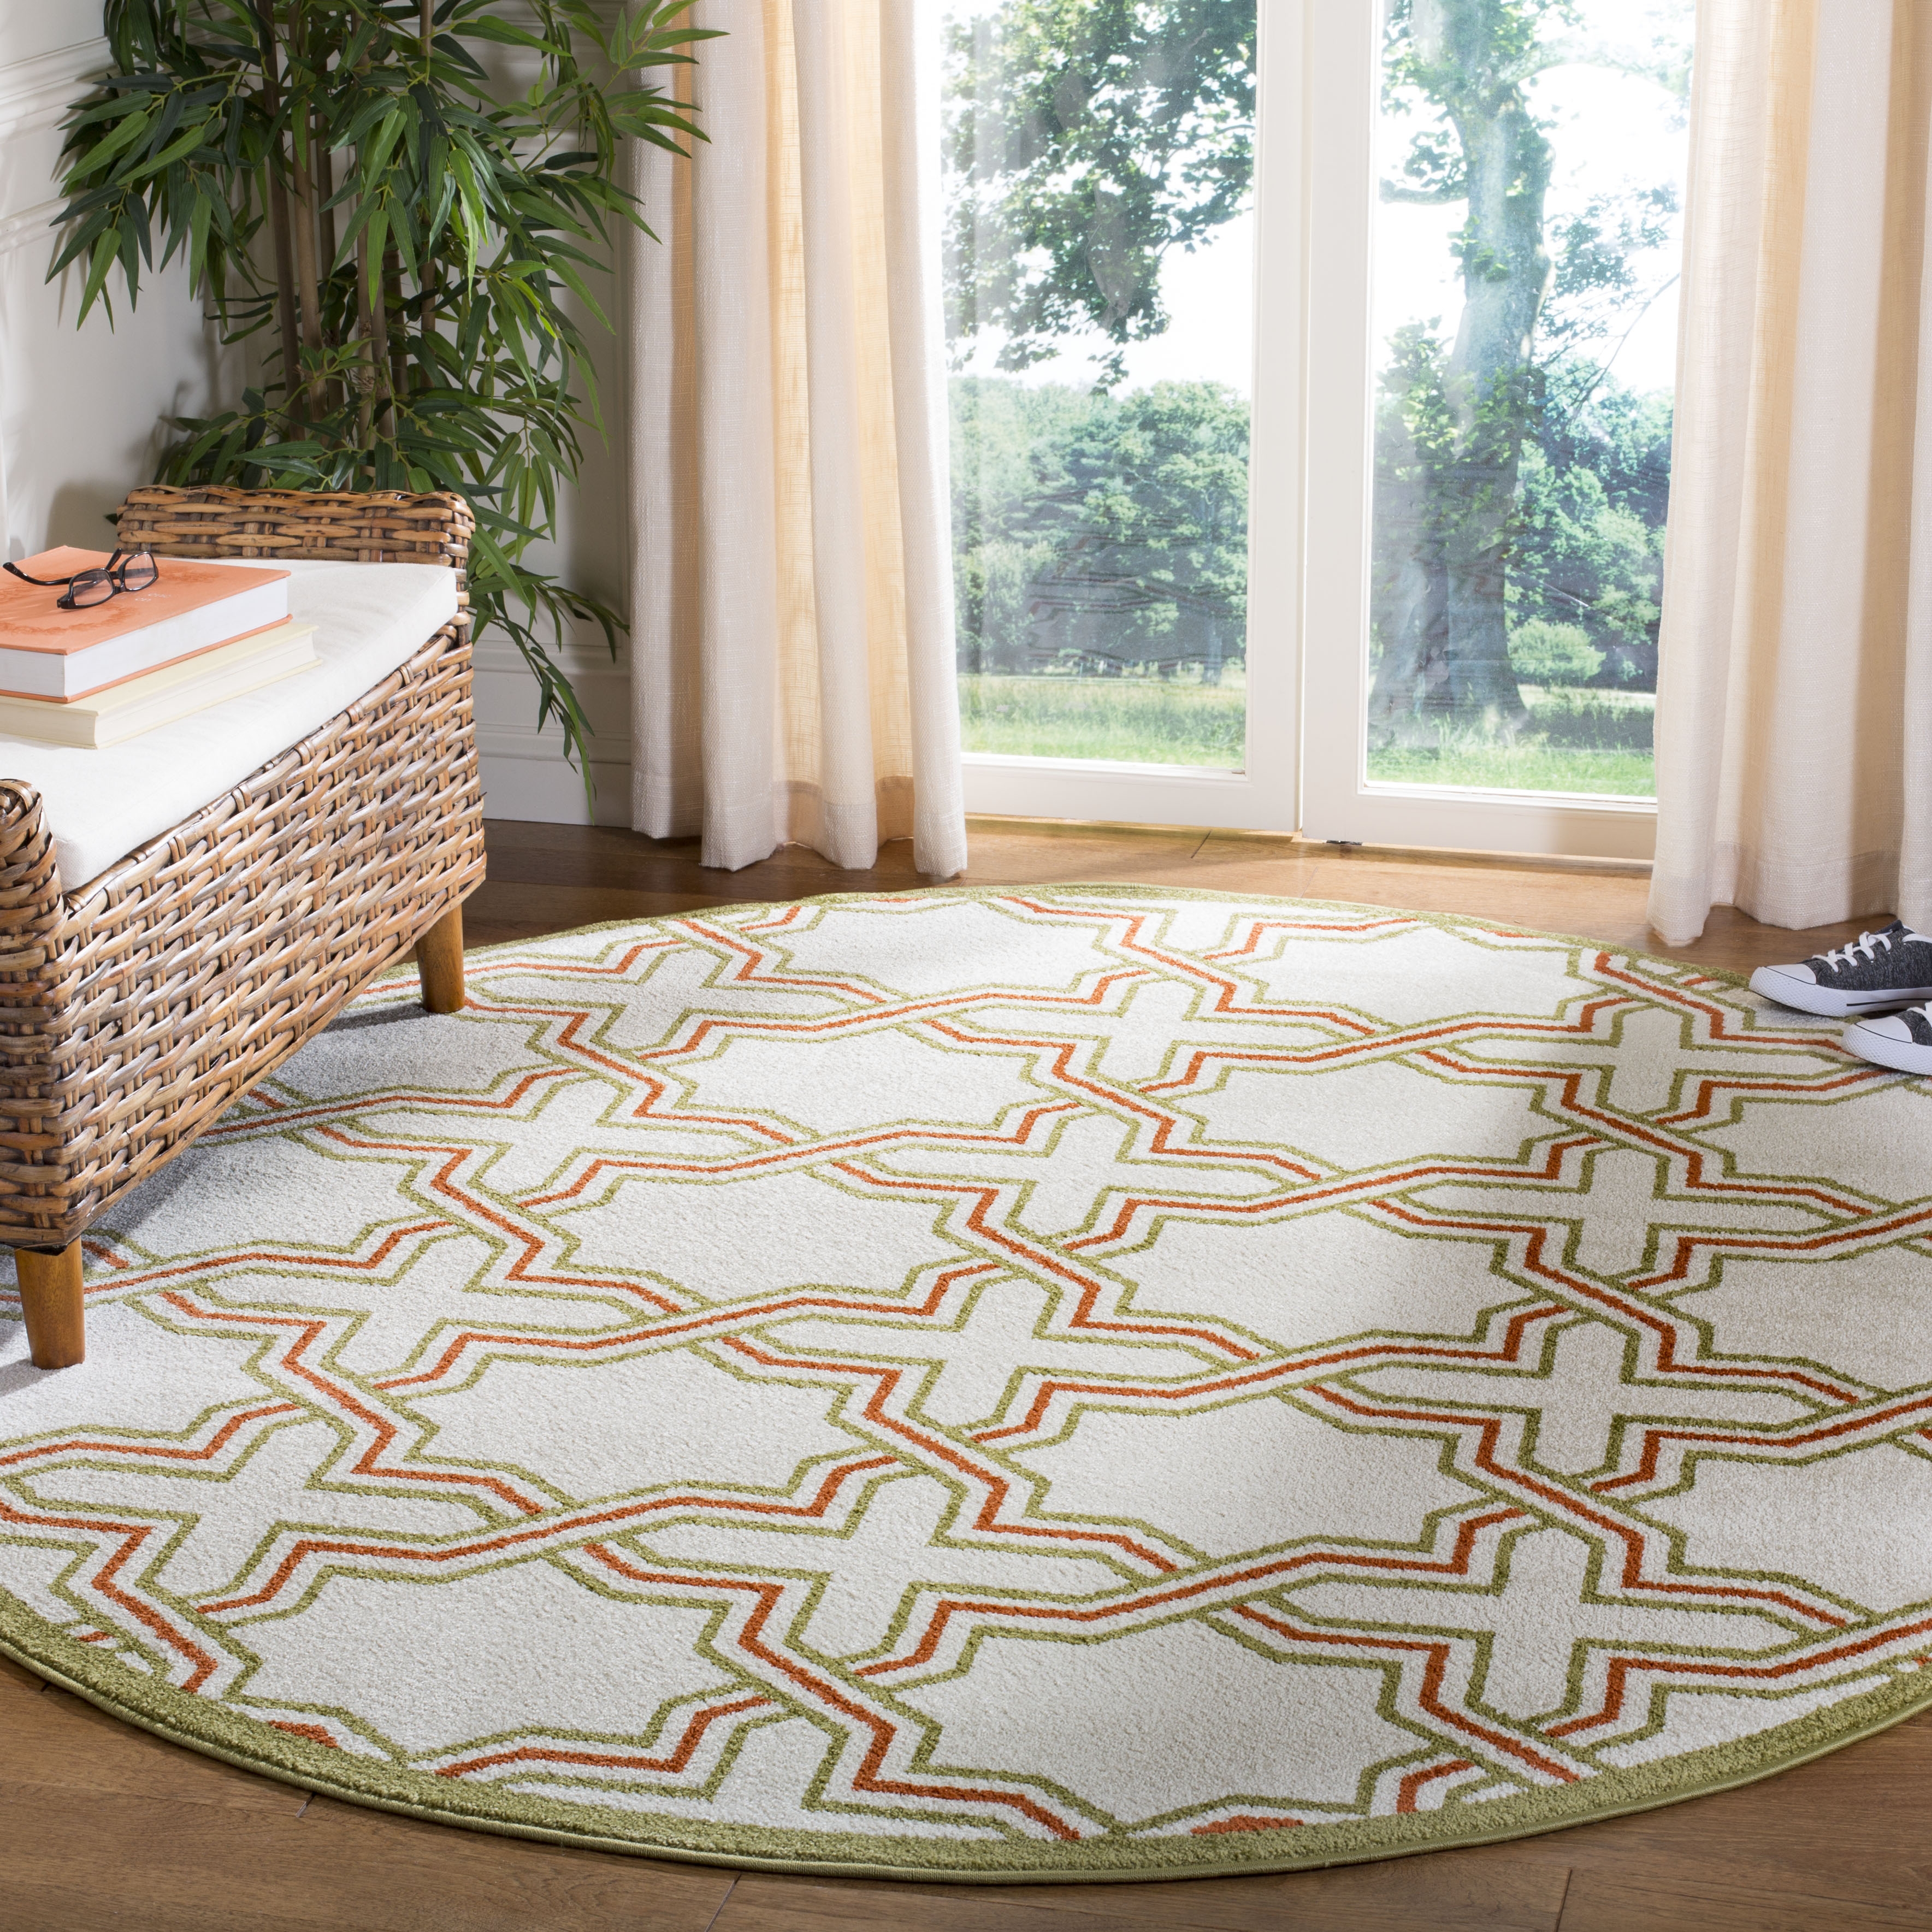 Arlo Home Indoor/Outdoor Woven Area Rug, AMT413A, Ivory/Light Green,  7' X 7' Round - Image 1